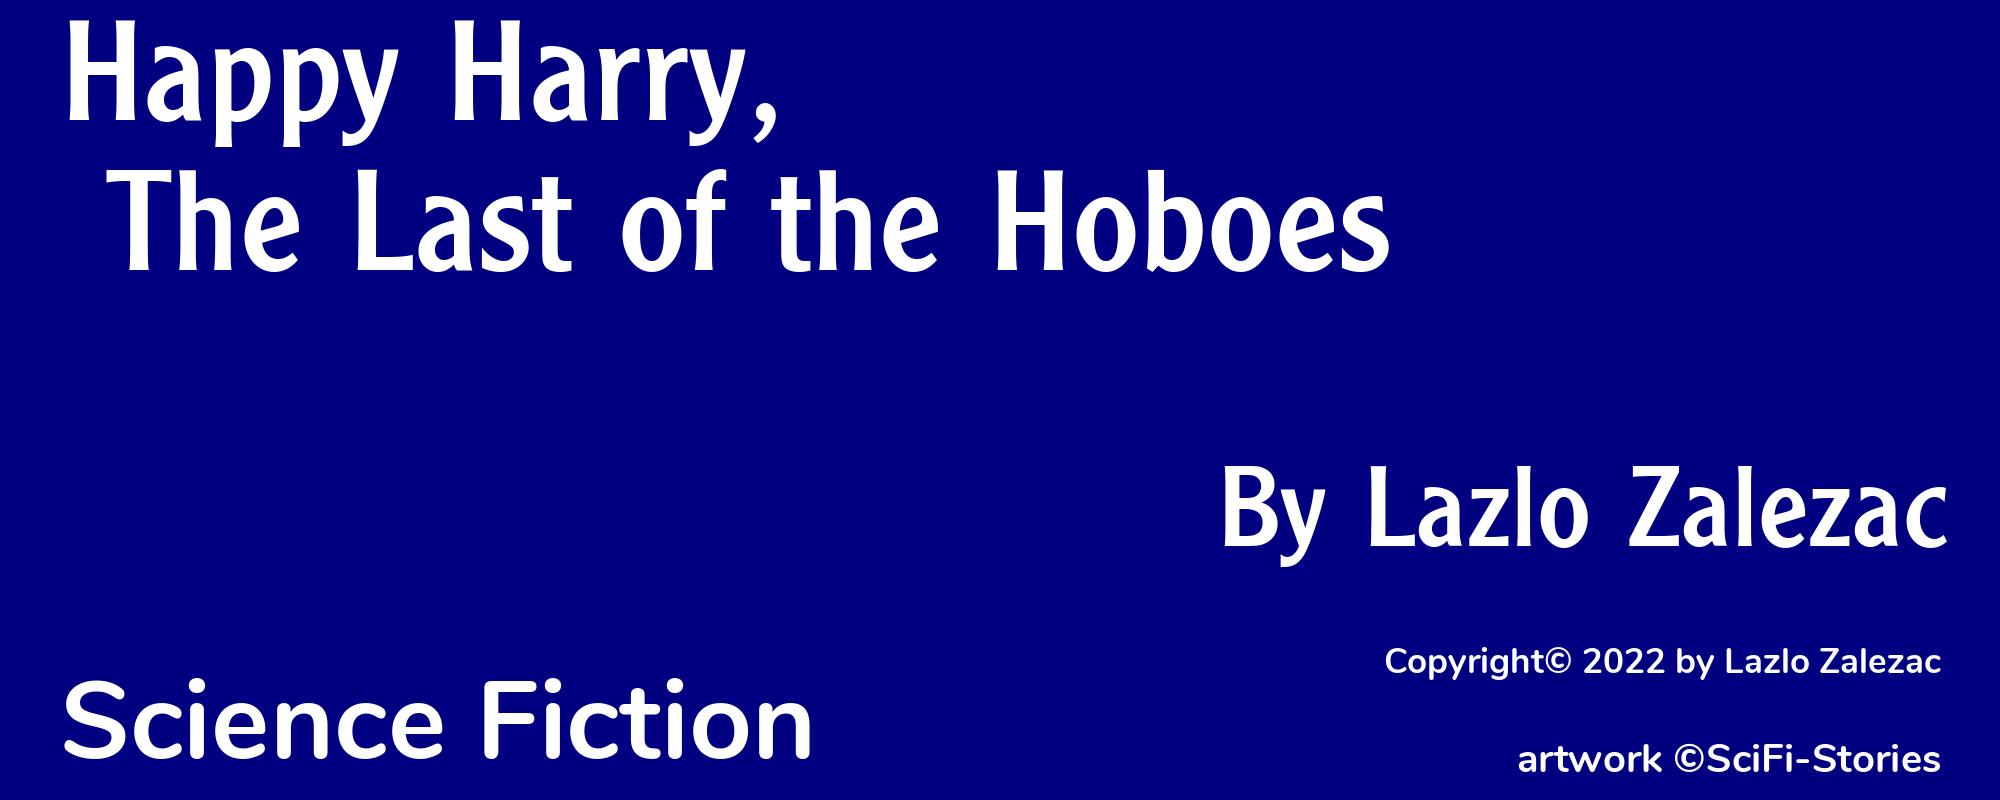 Happy Harry, The Last of the Hoboes - Cover